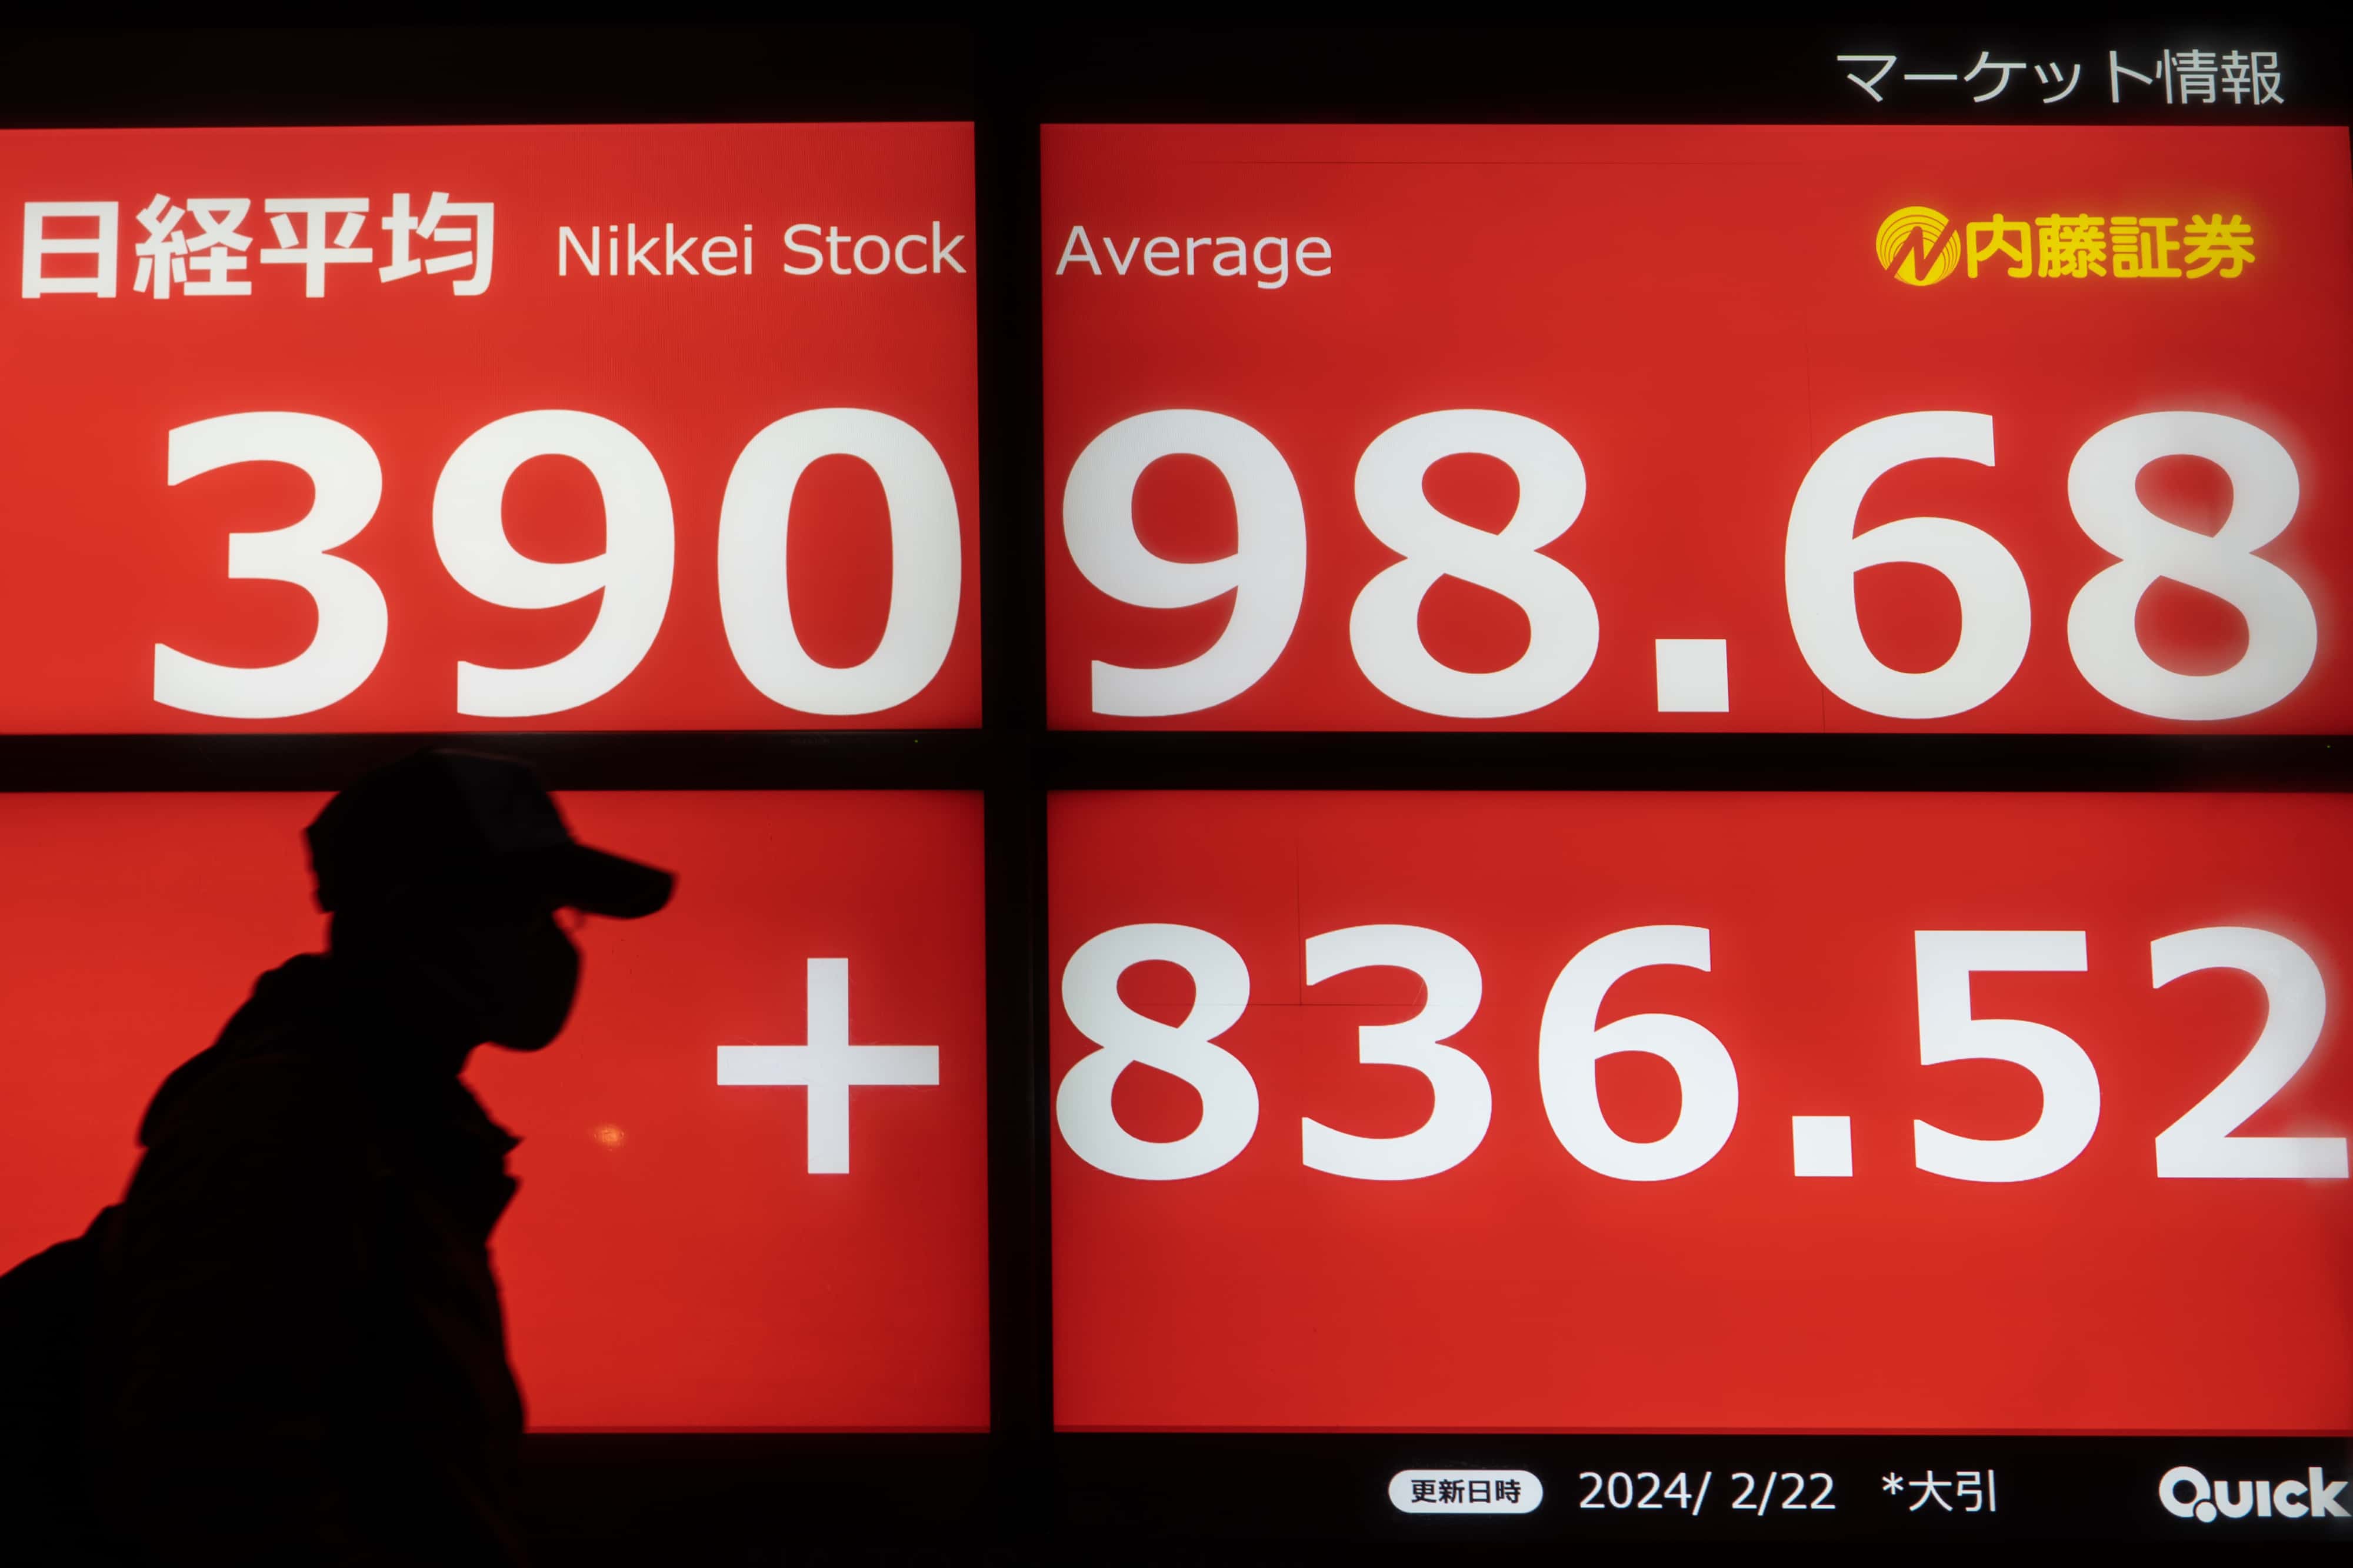 Japan: Nikkei Index Surges Past 1989's Record High